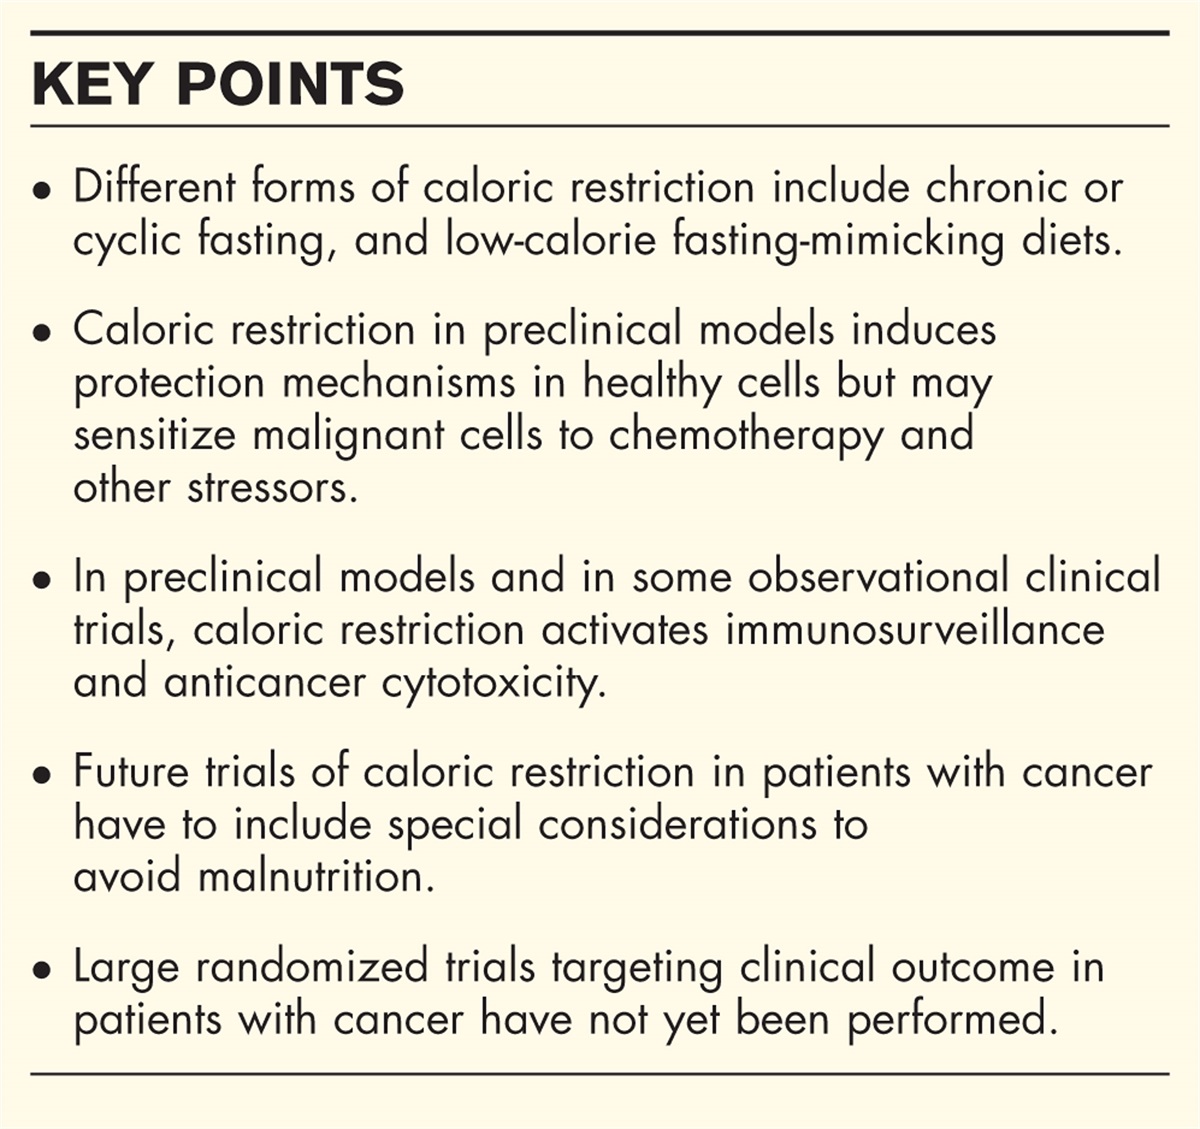 Caloric restriction and fasting-mimicking diets in the treatment of cancer patients